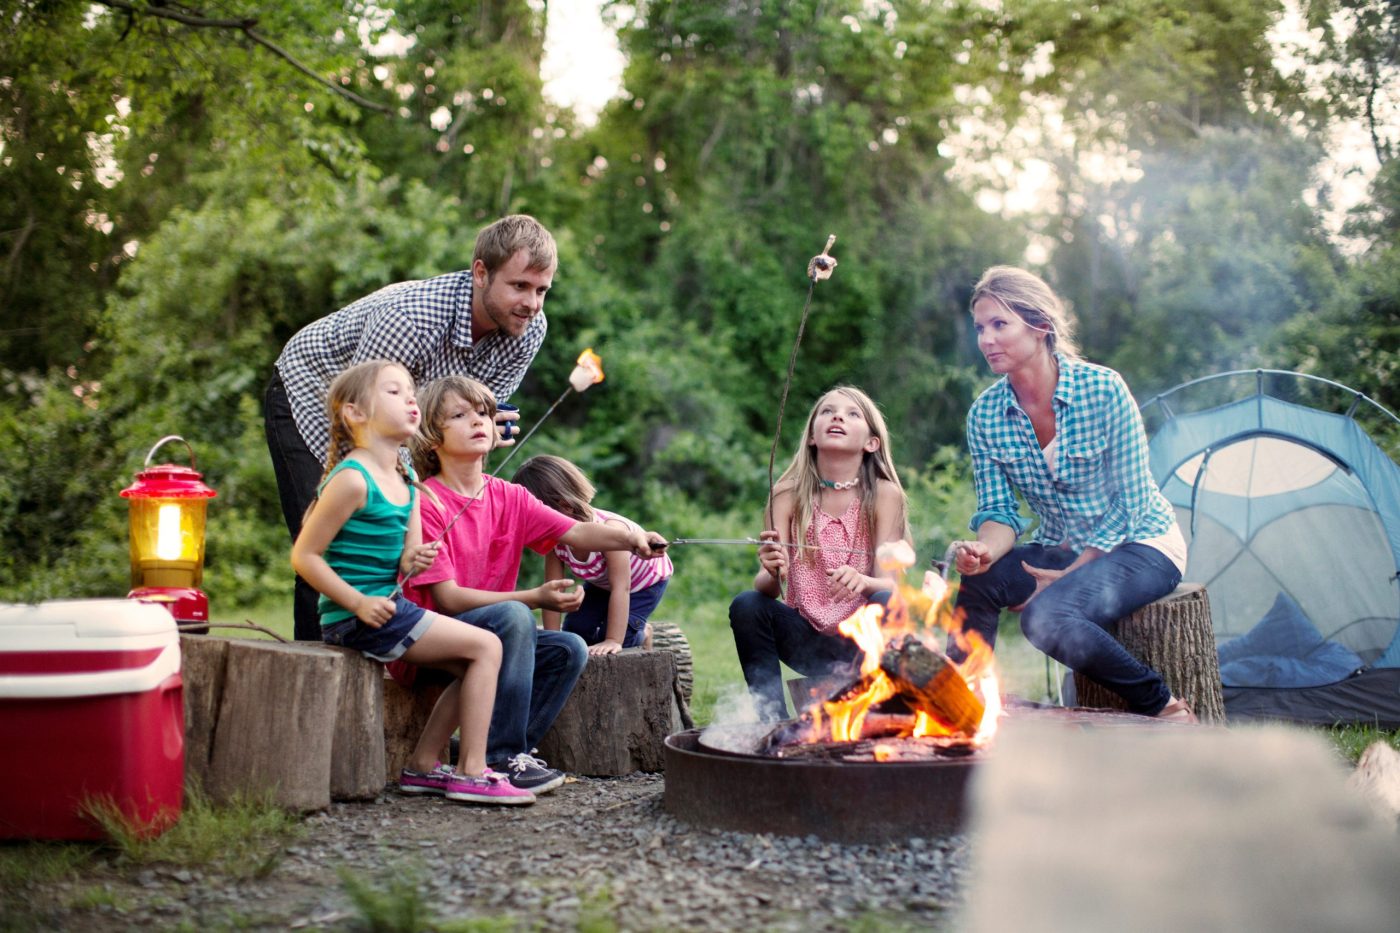 This summer, Veterans and their families can save money on access to parks and campgrounds around the country.